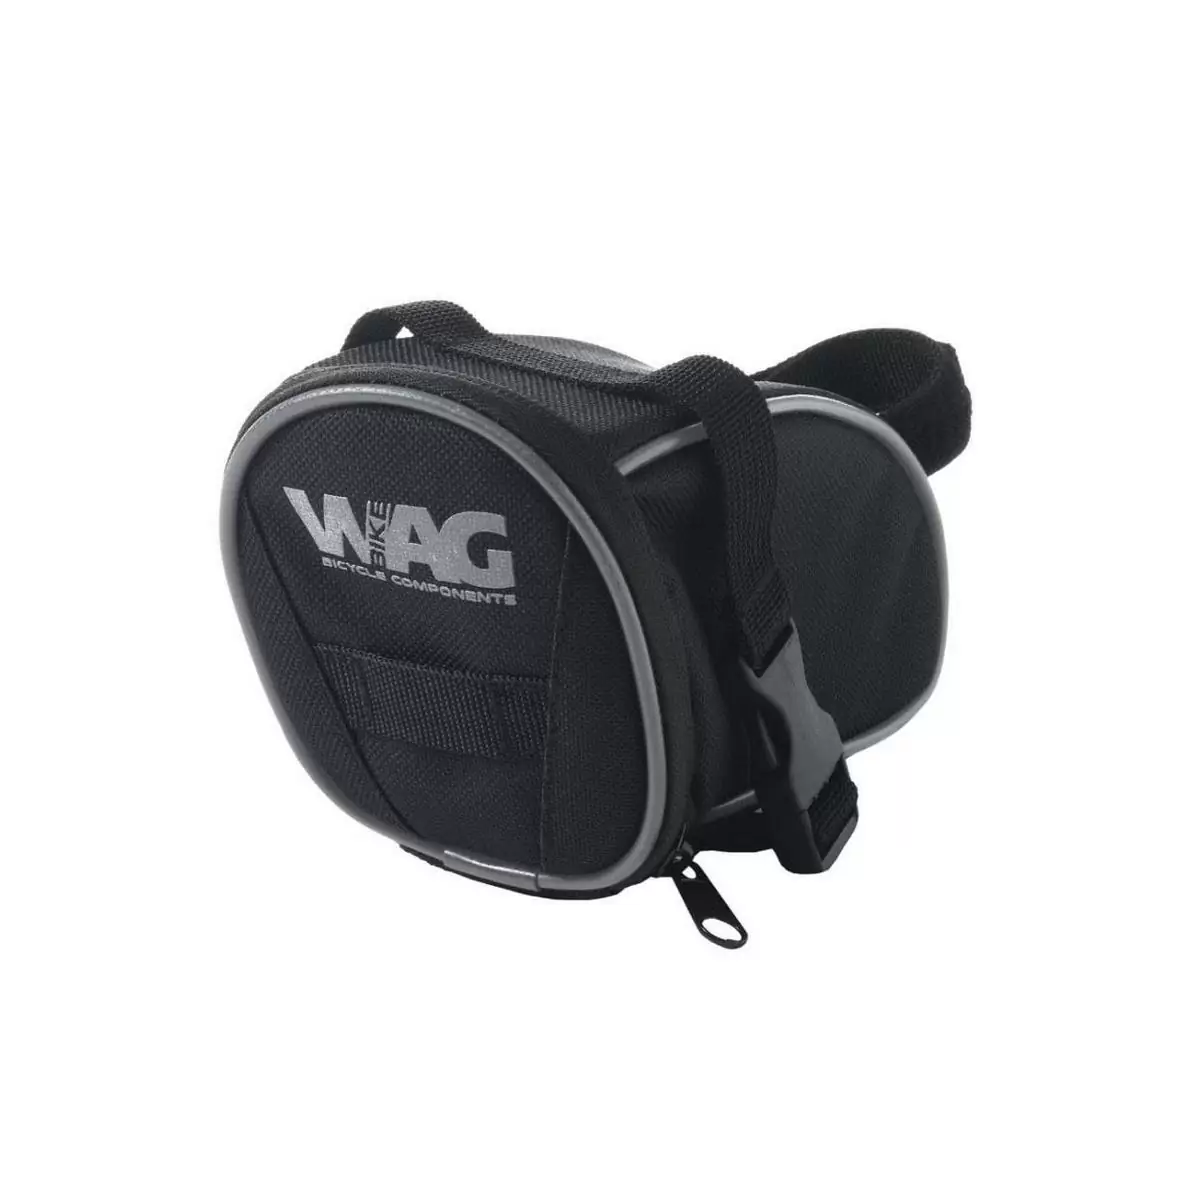 saddle bag with double clip mount and straps strap - image